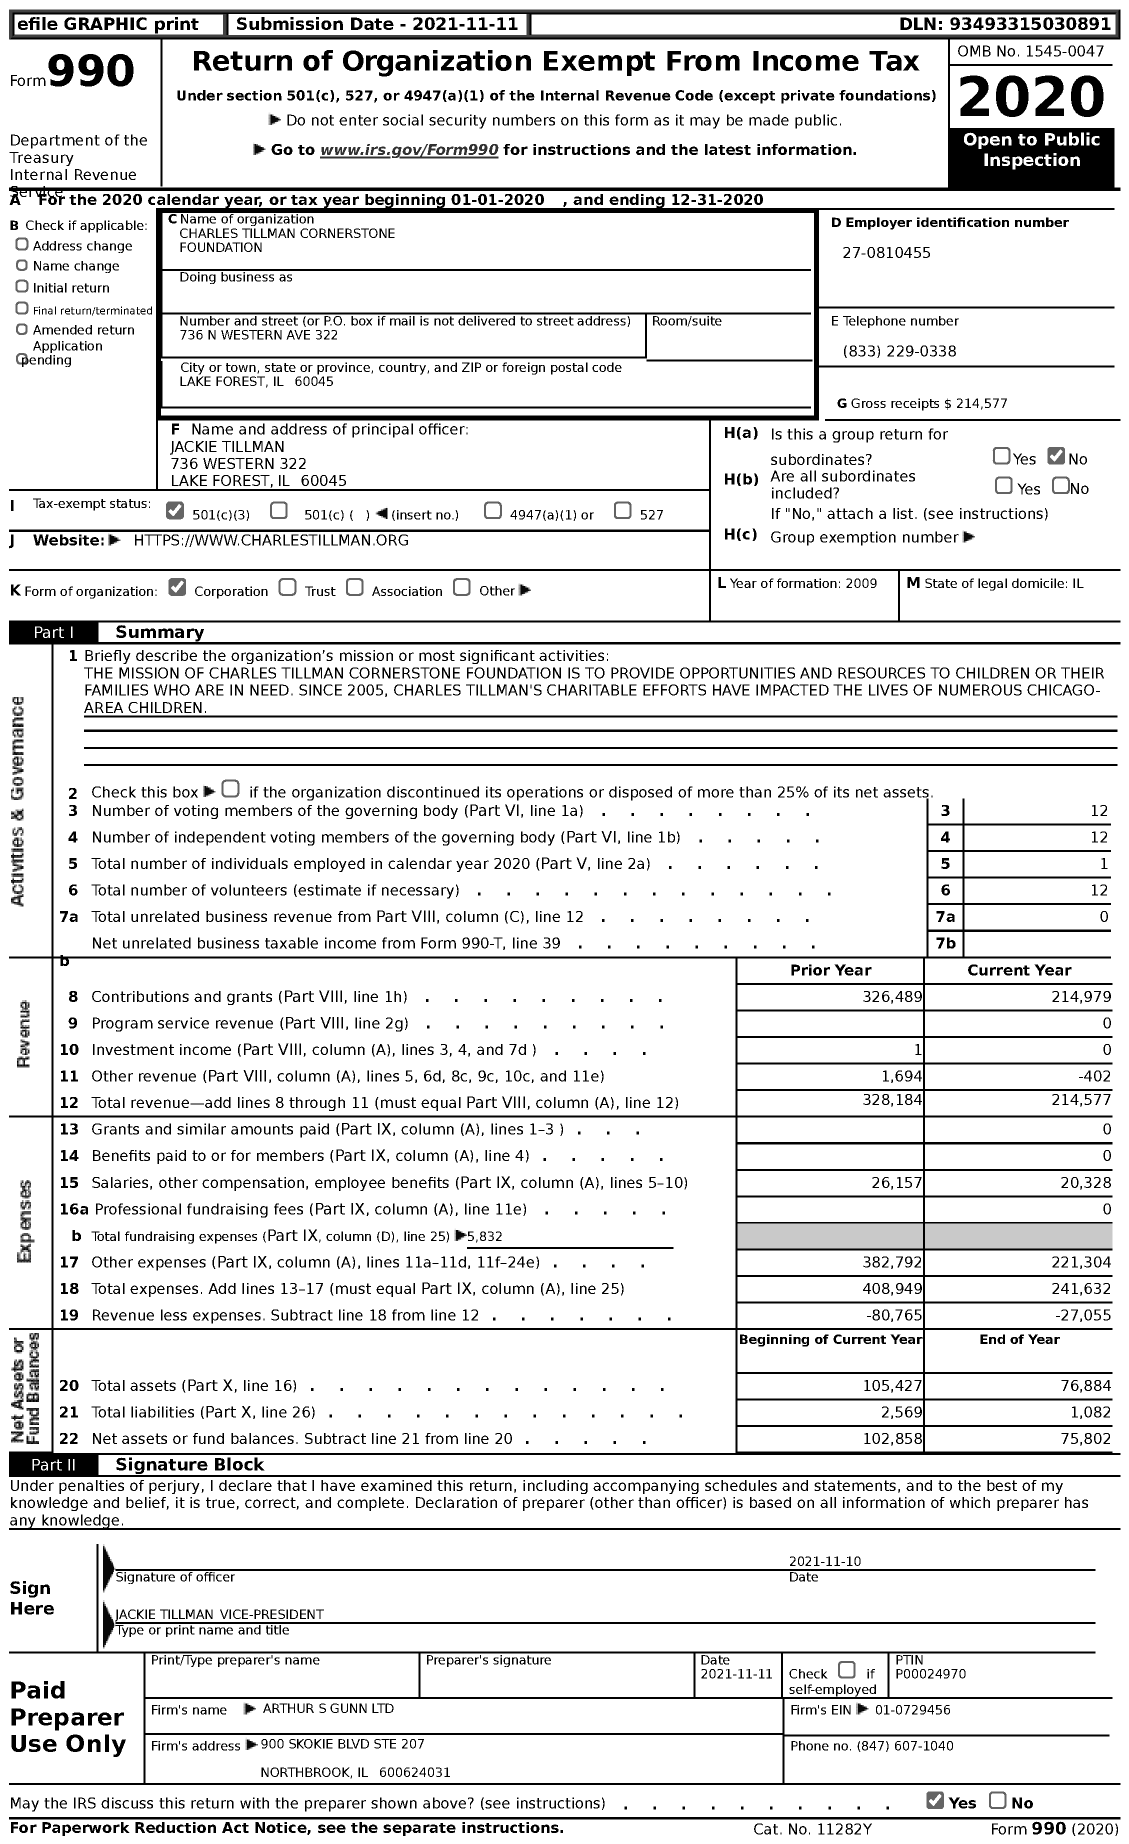 Image of first page of 2020 Form 990 for Charles Tillman Cornerstone Foundation